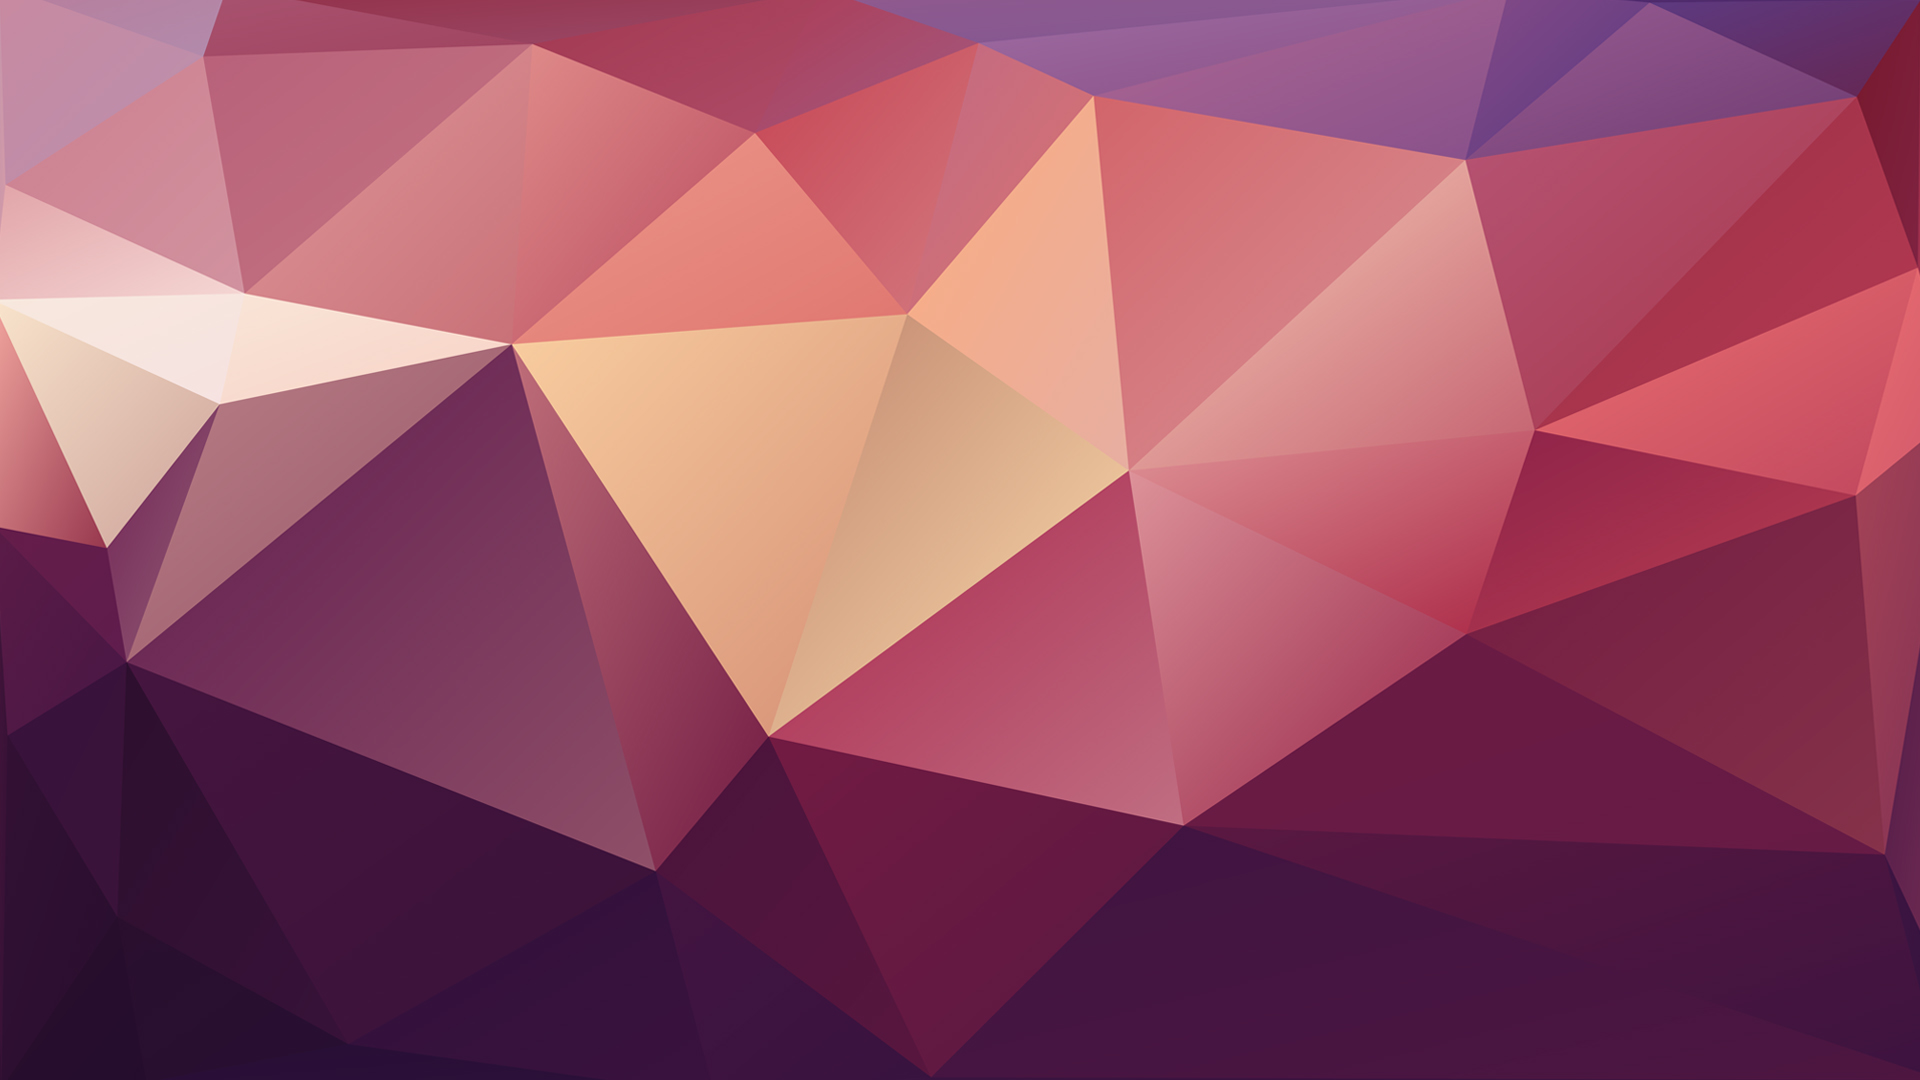 Abstract Geometric Low Poly Wallpaper By Mcfrolic